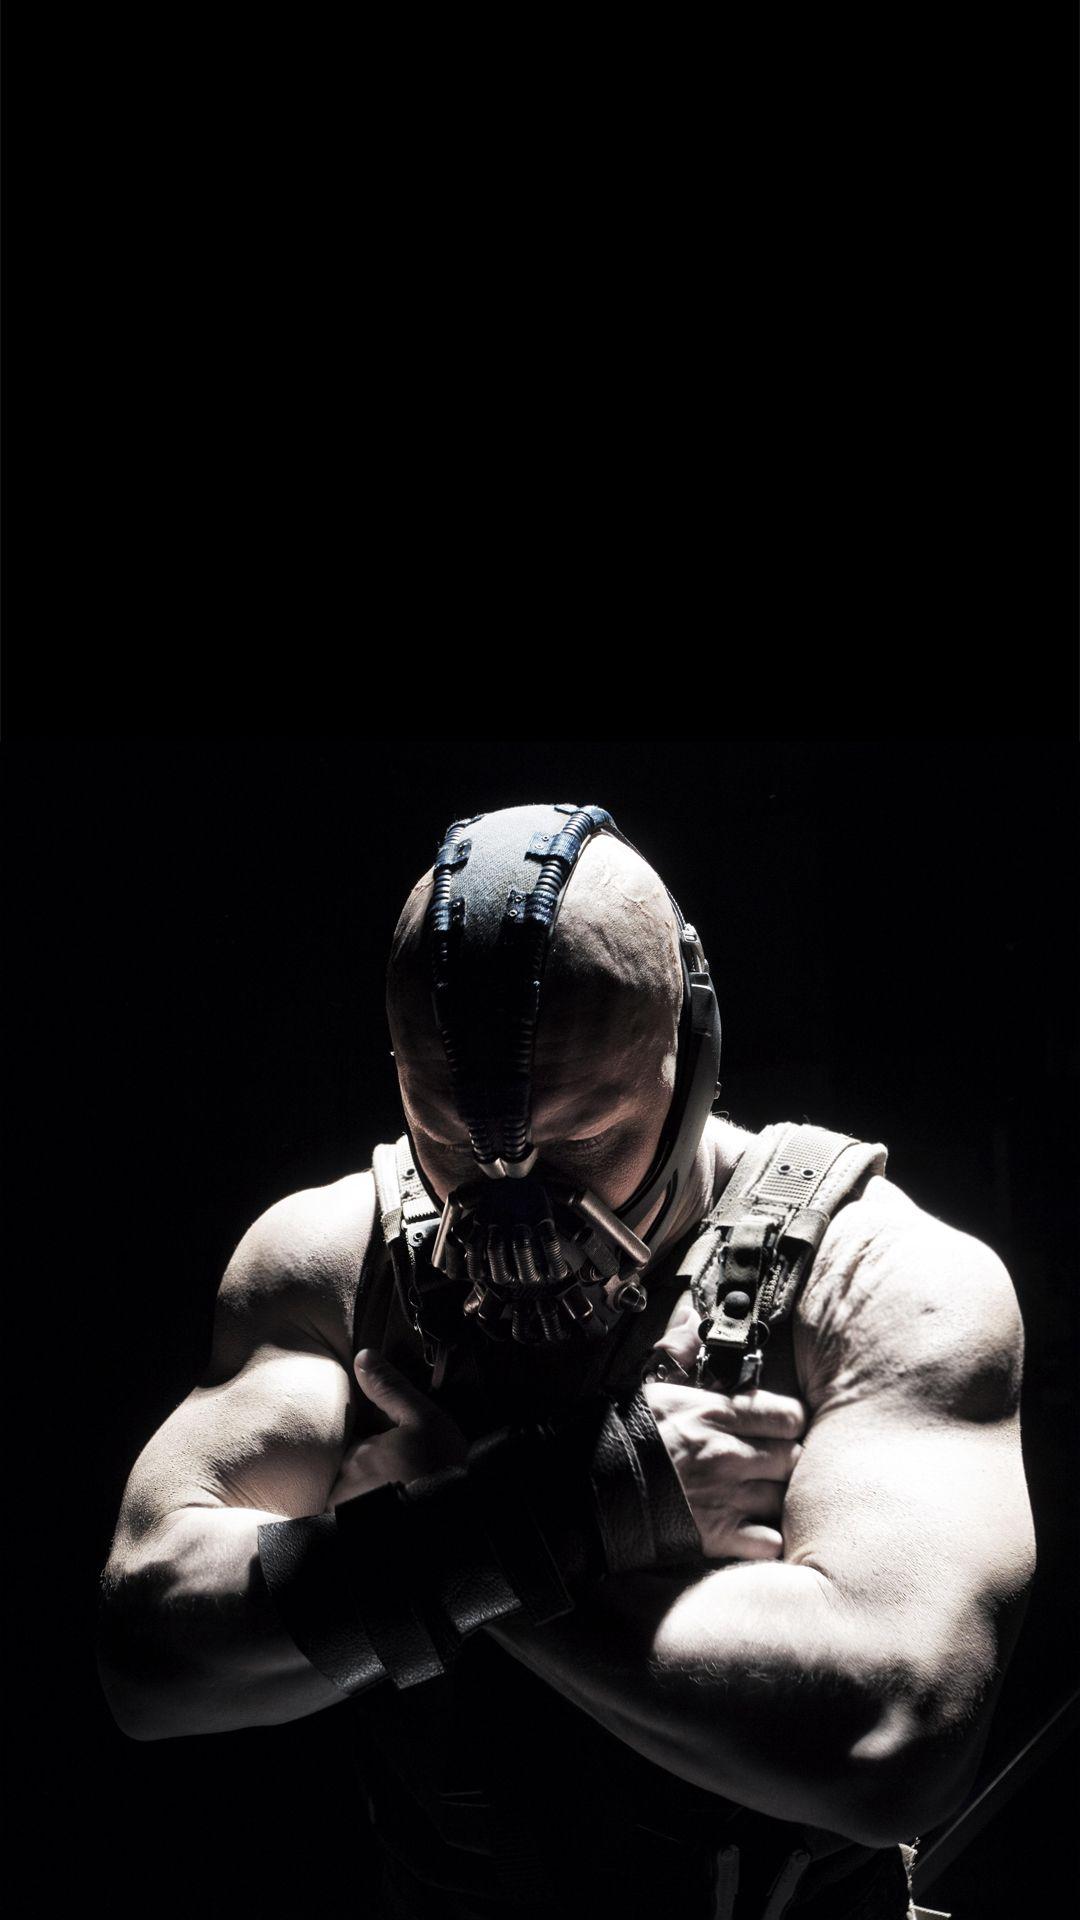 Bane The Dark Knight RisesK wallpaper, free and easy to download